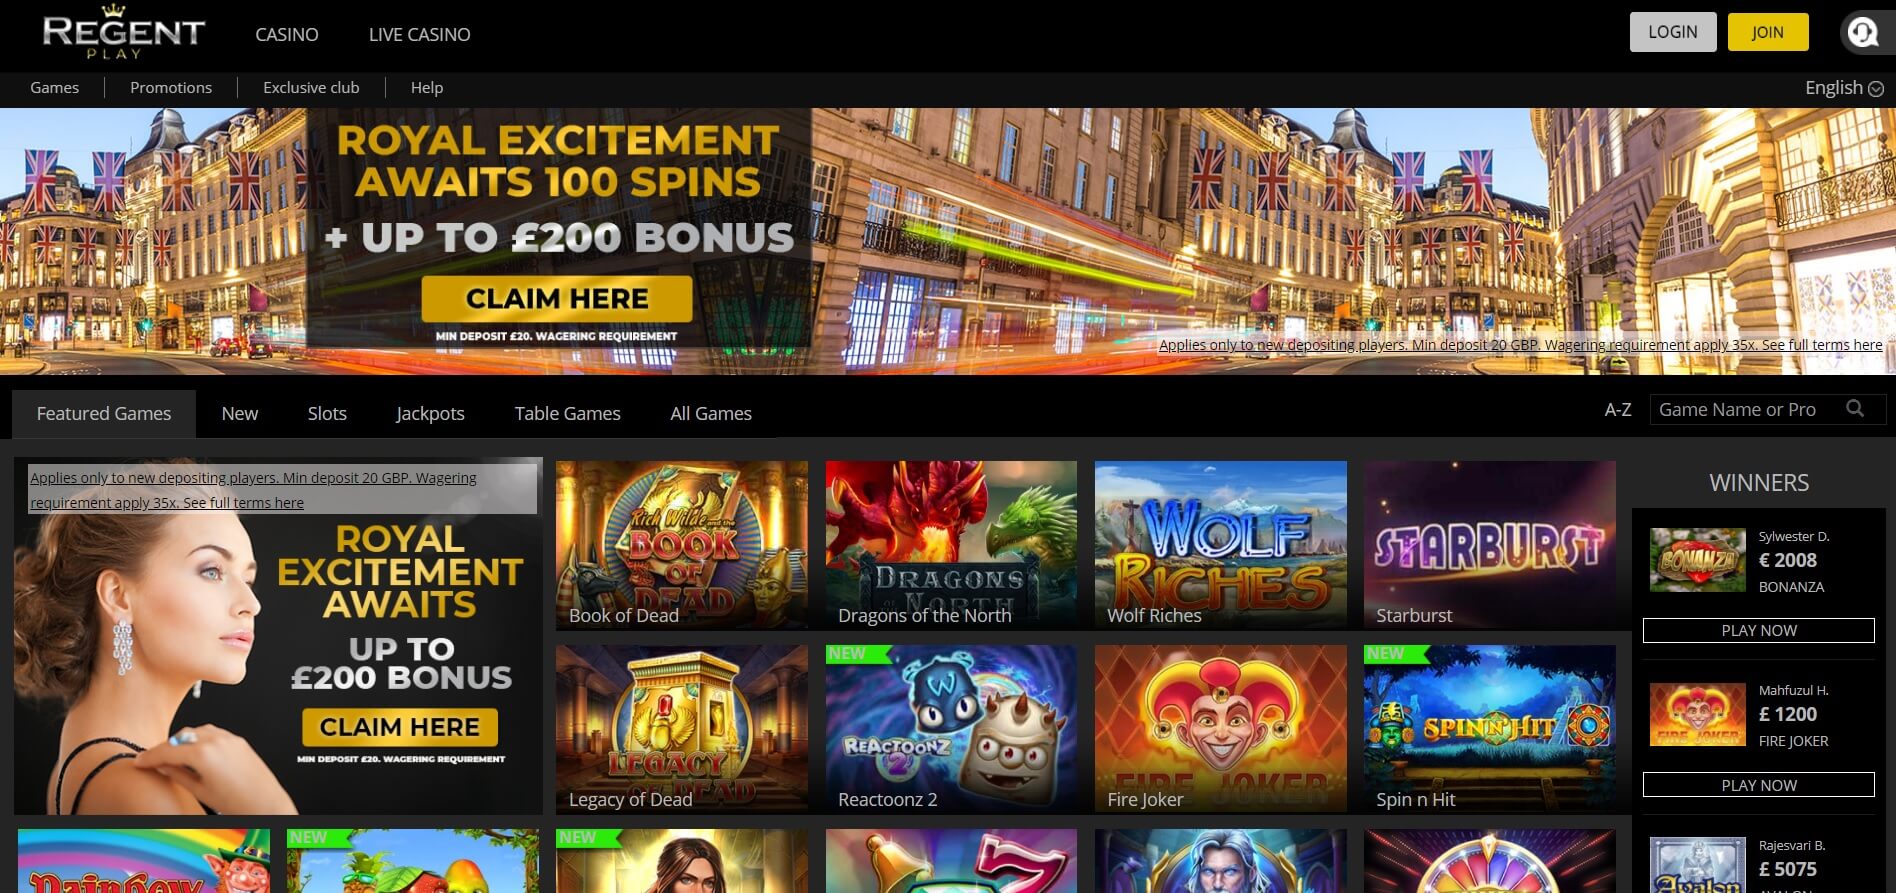 Regent Play Casino games and slots